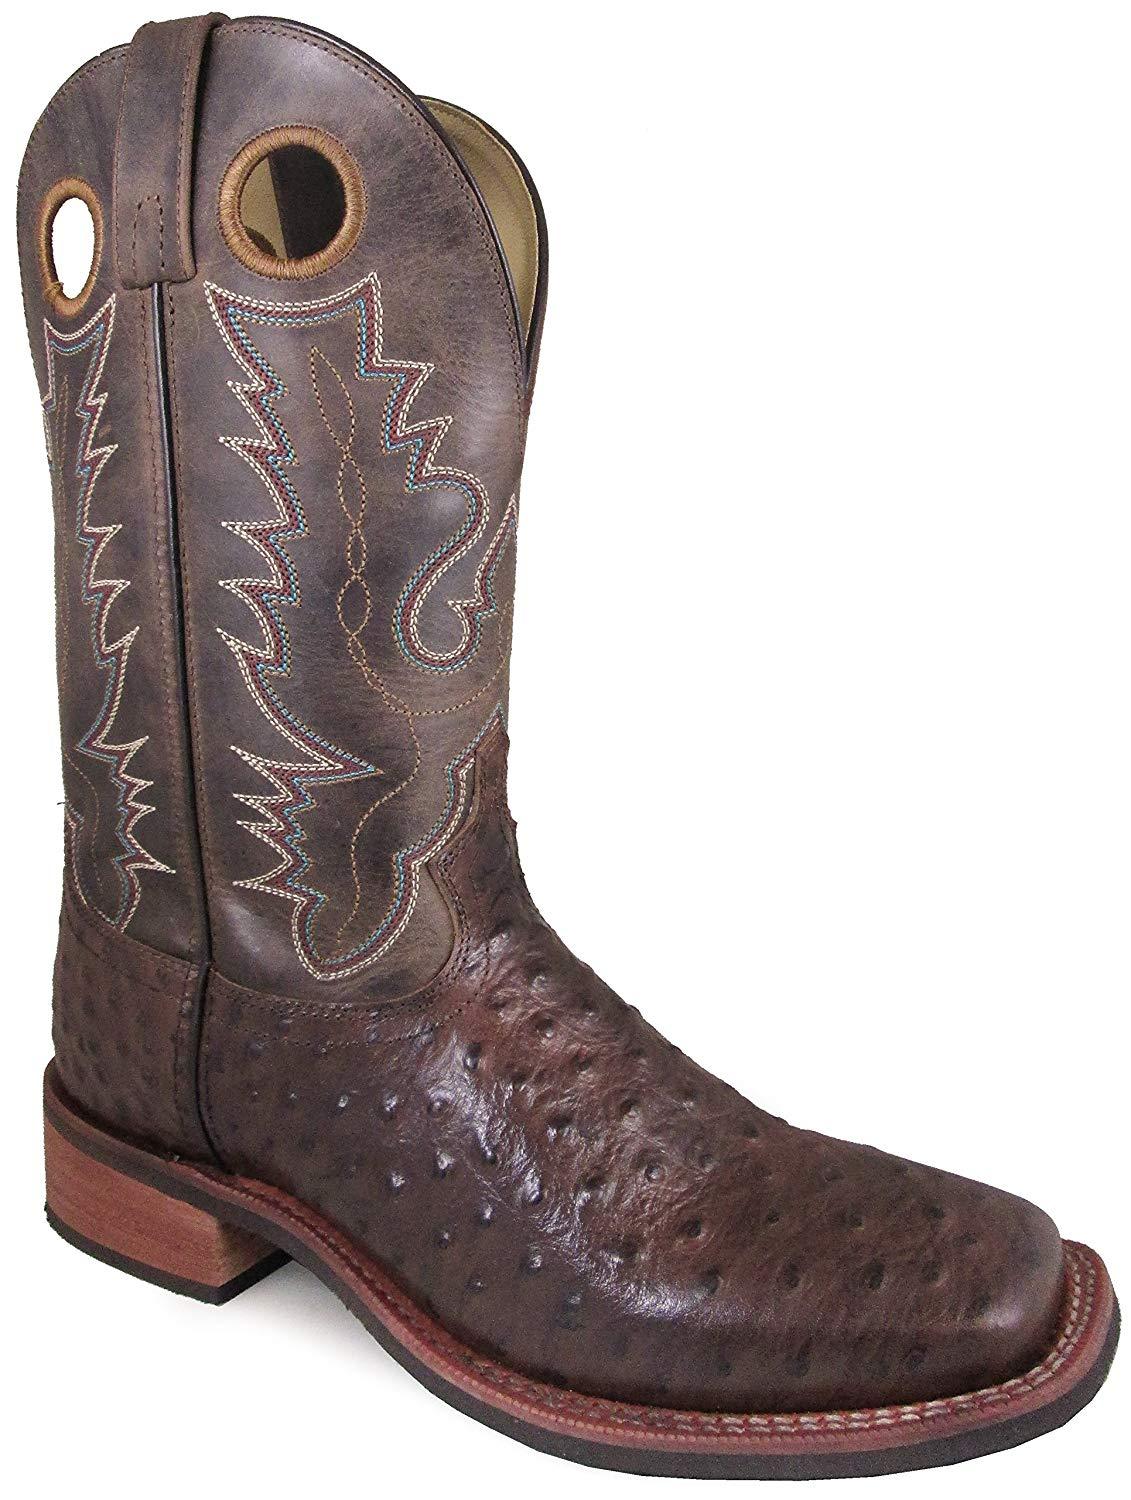 4047 Smoky Mountain Boots DANVILLE Men's Full Quill Ostrich Print Square Toe